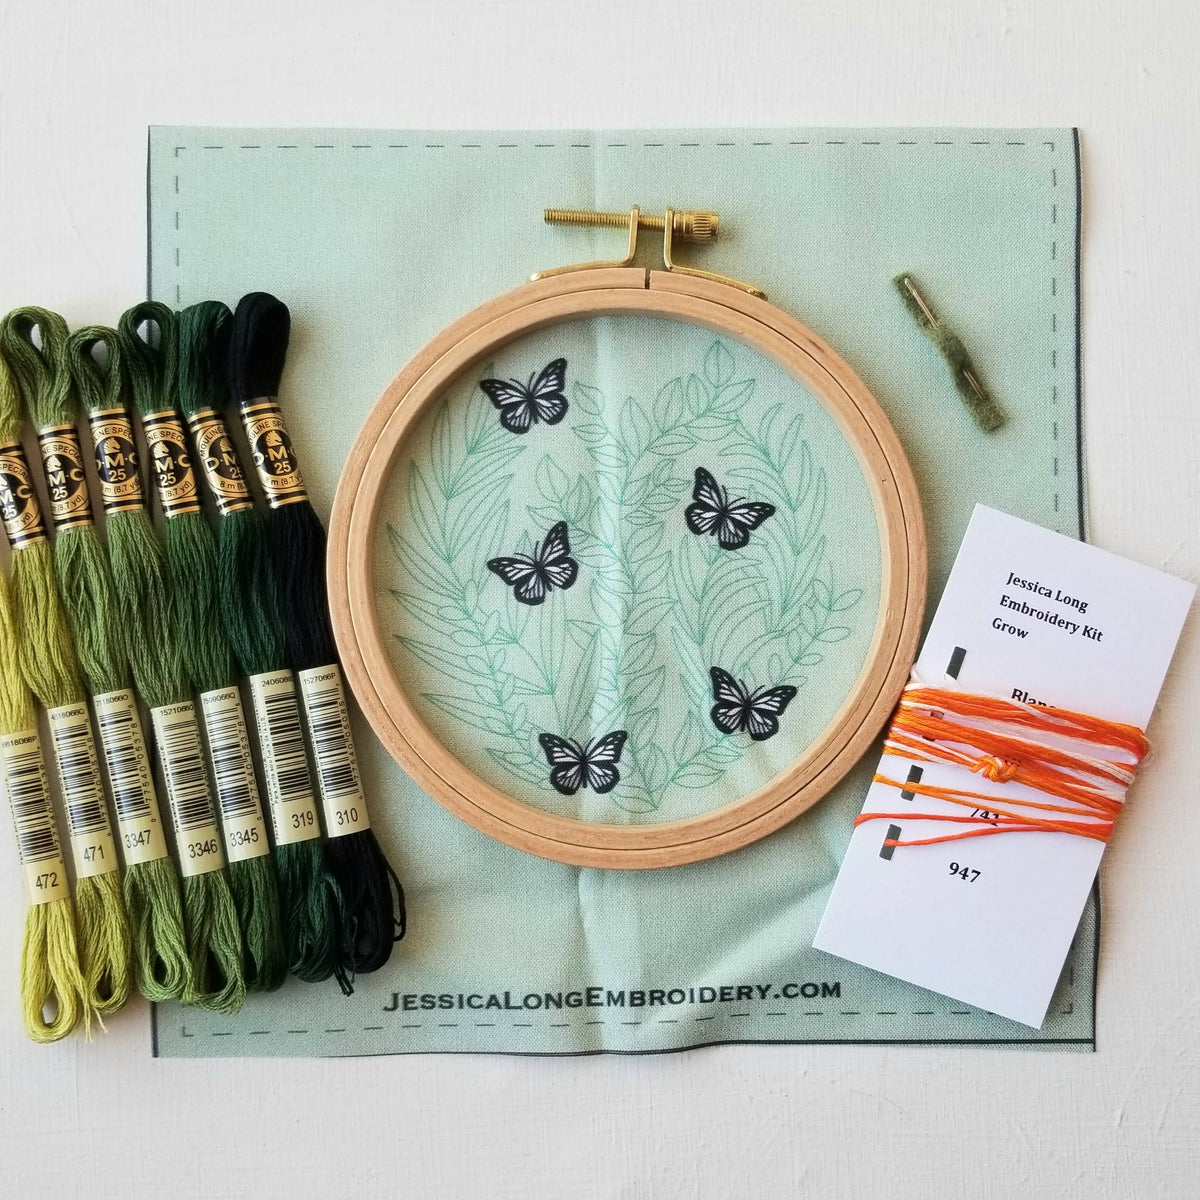 &quot;Love Grows&quot; butterfly hand embroidery kit